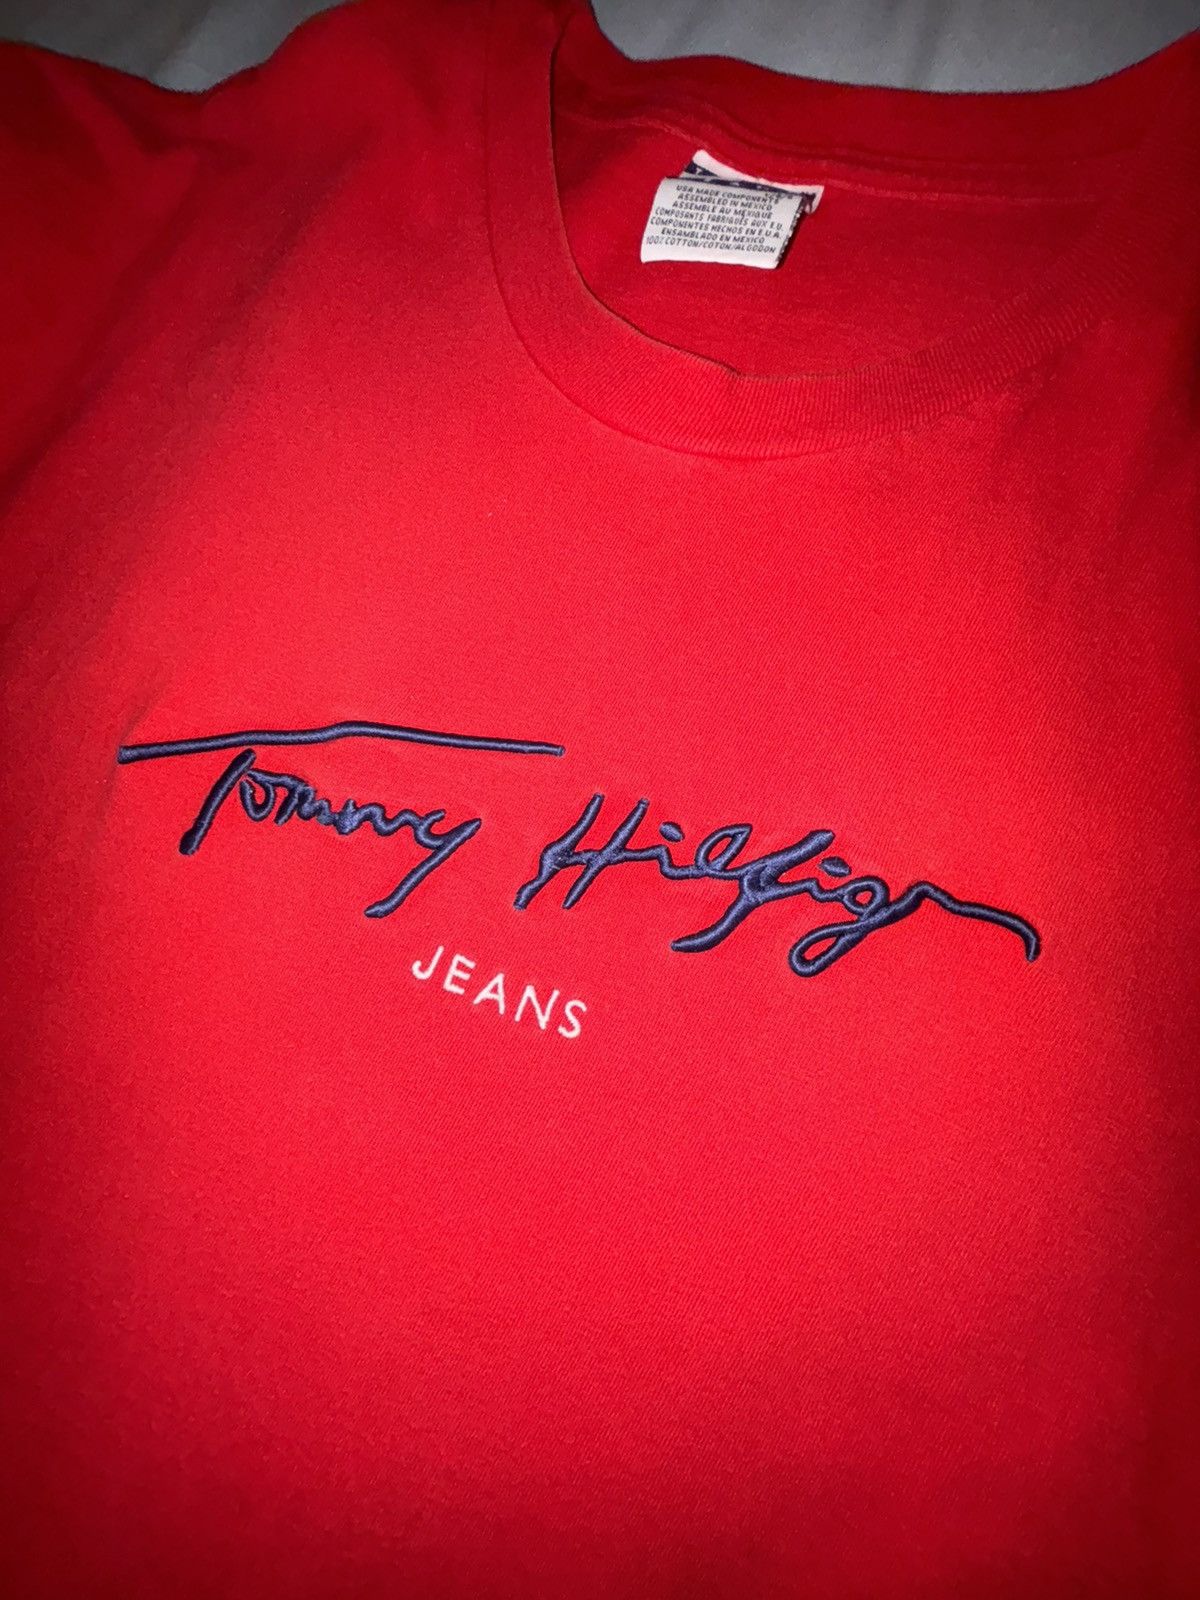 Vintage Tommy Hilfiger Signature Spellout Embroidered Logo Jeans 90s Size US L / EU 52-54 / 3 - 2 Preview